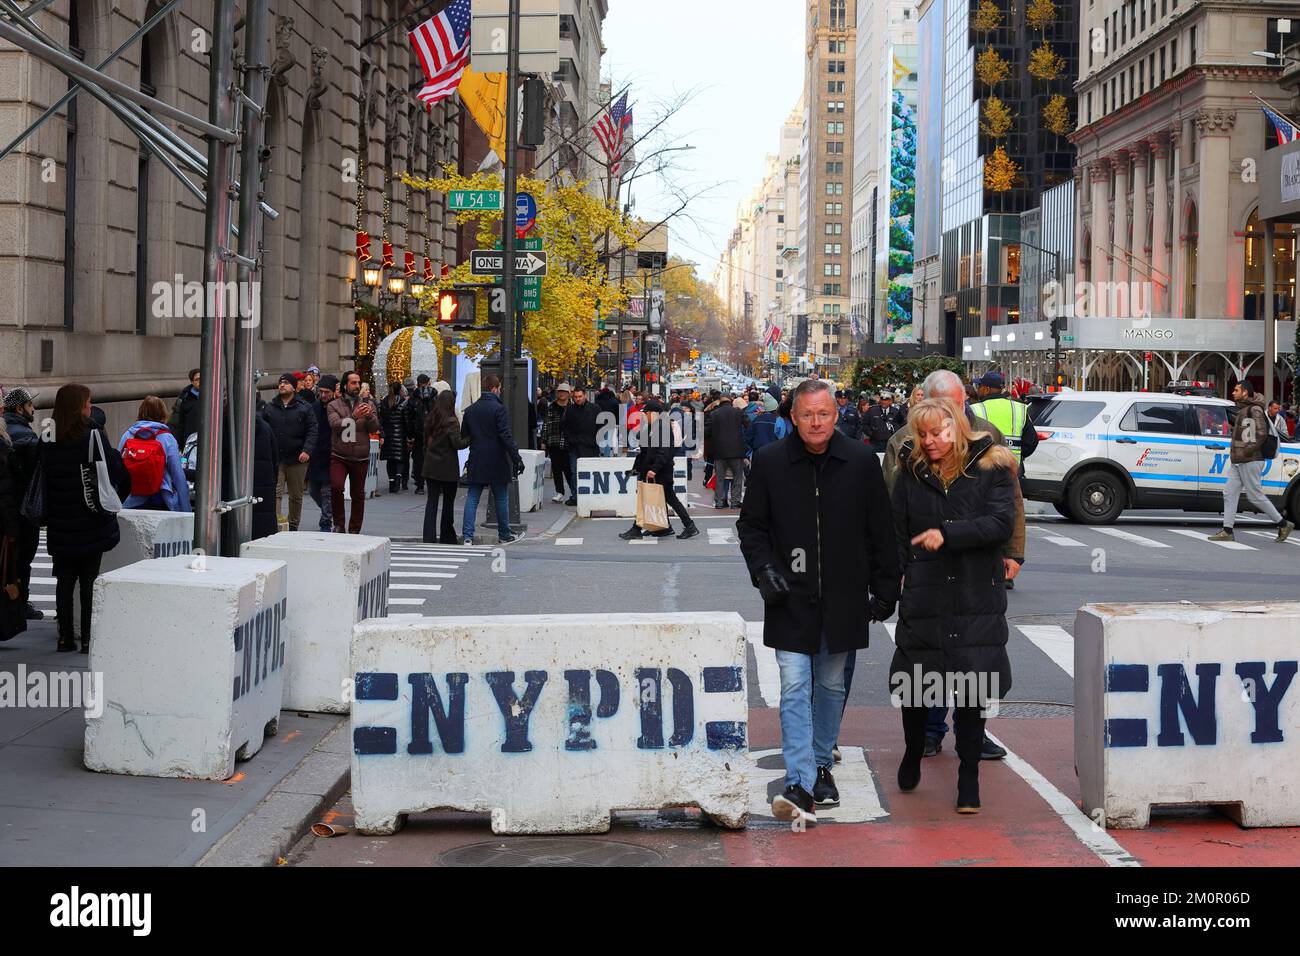 People walking through a NYPD concrete barrier to deter truck attacks during Open Streets Sunday on Fifth Ave, New York, December 4, 2022. Stock Photo